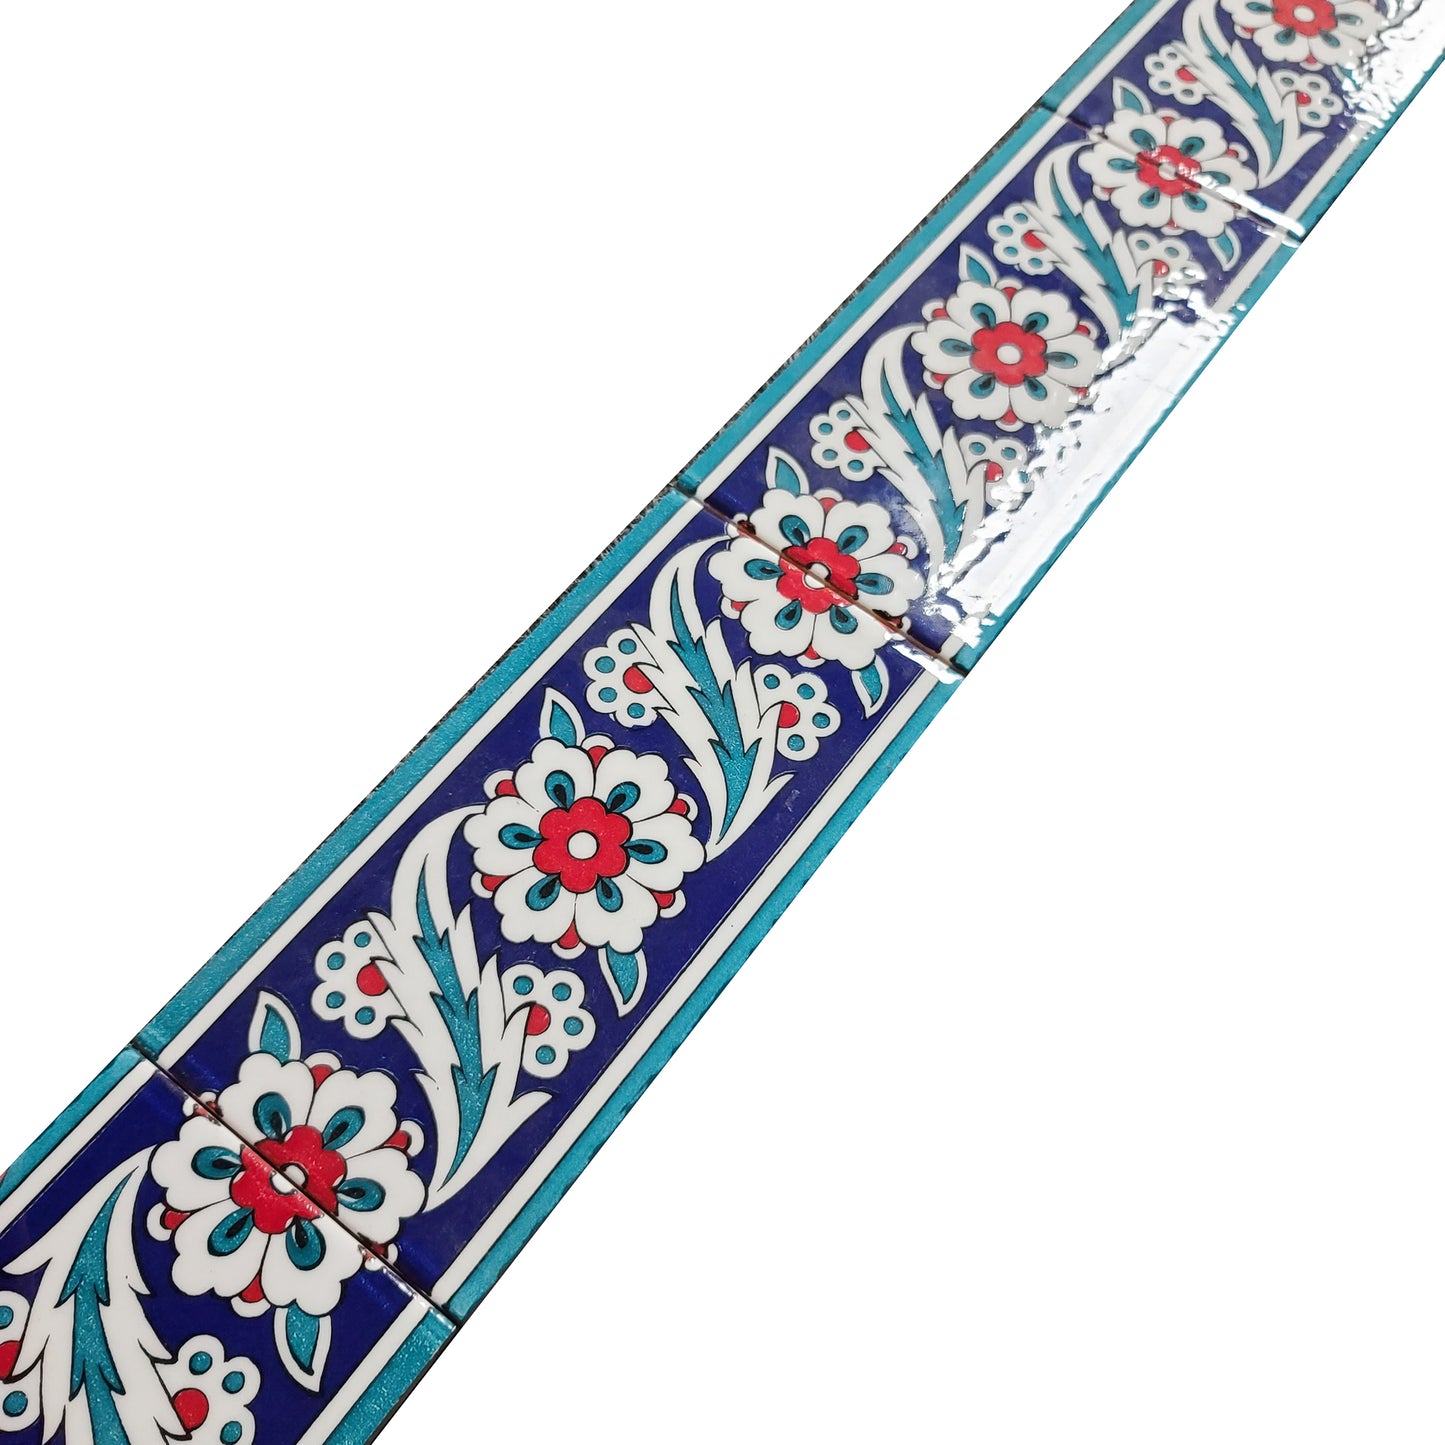 4x8 Border Tile for Masjid and Mosque Wall Turkish Ceramic